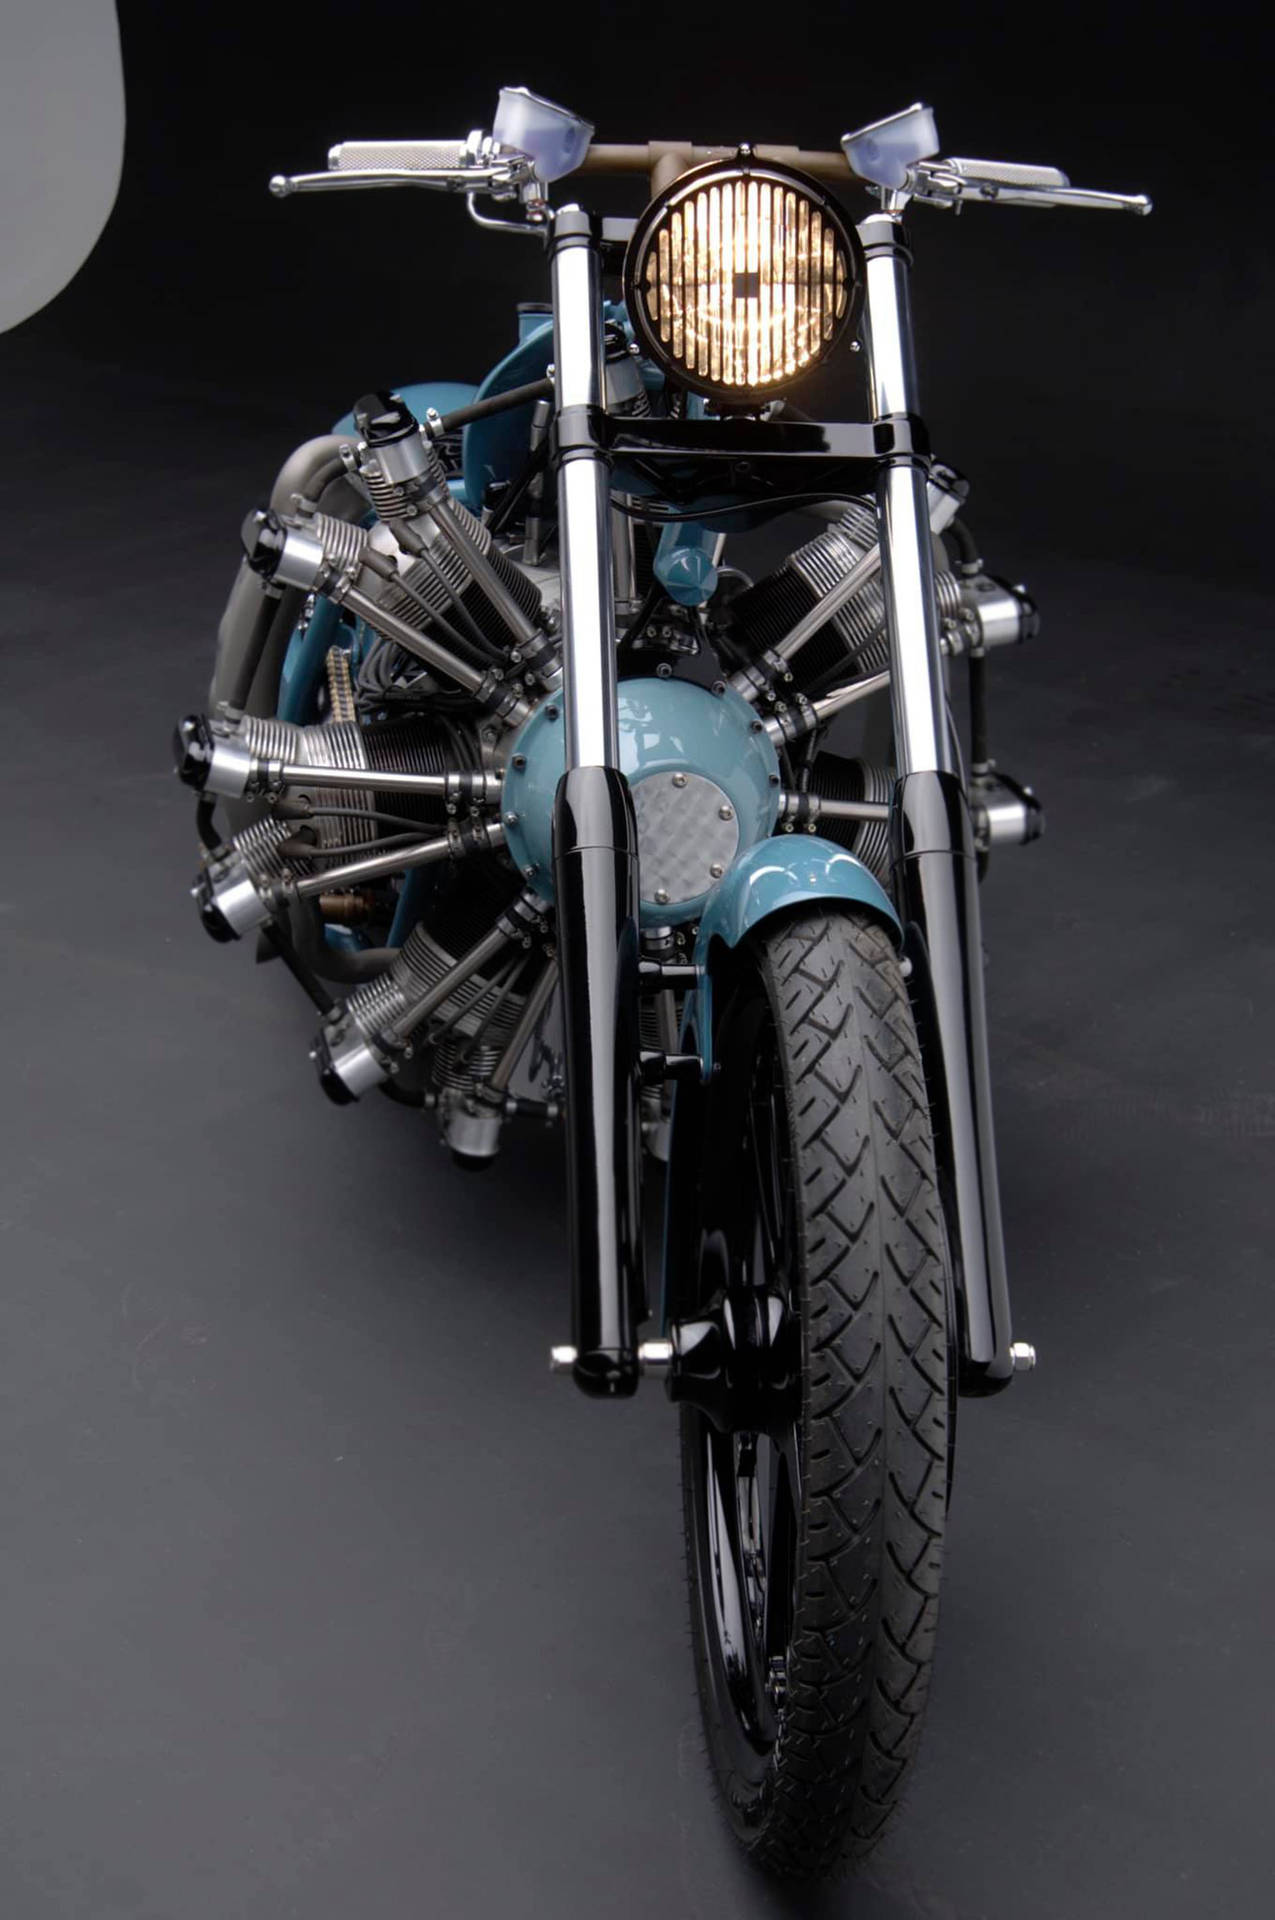 West Coast Choppers Radial Engine Wallpaper